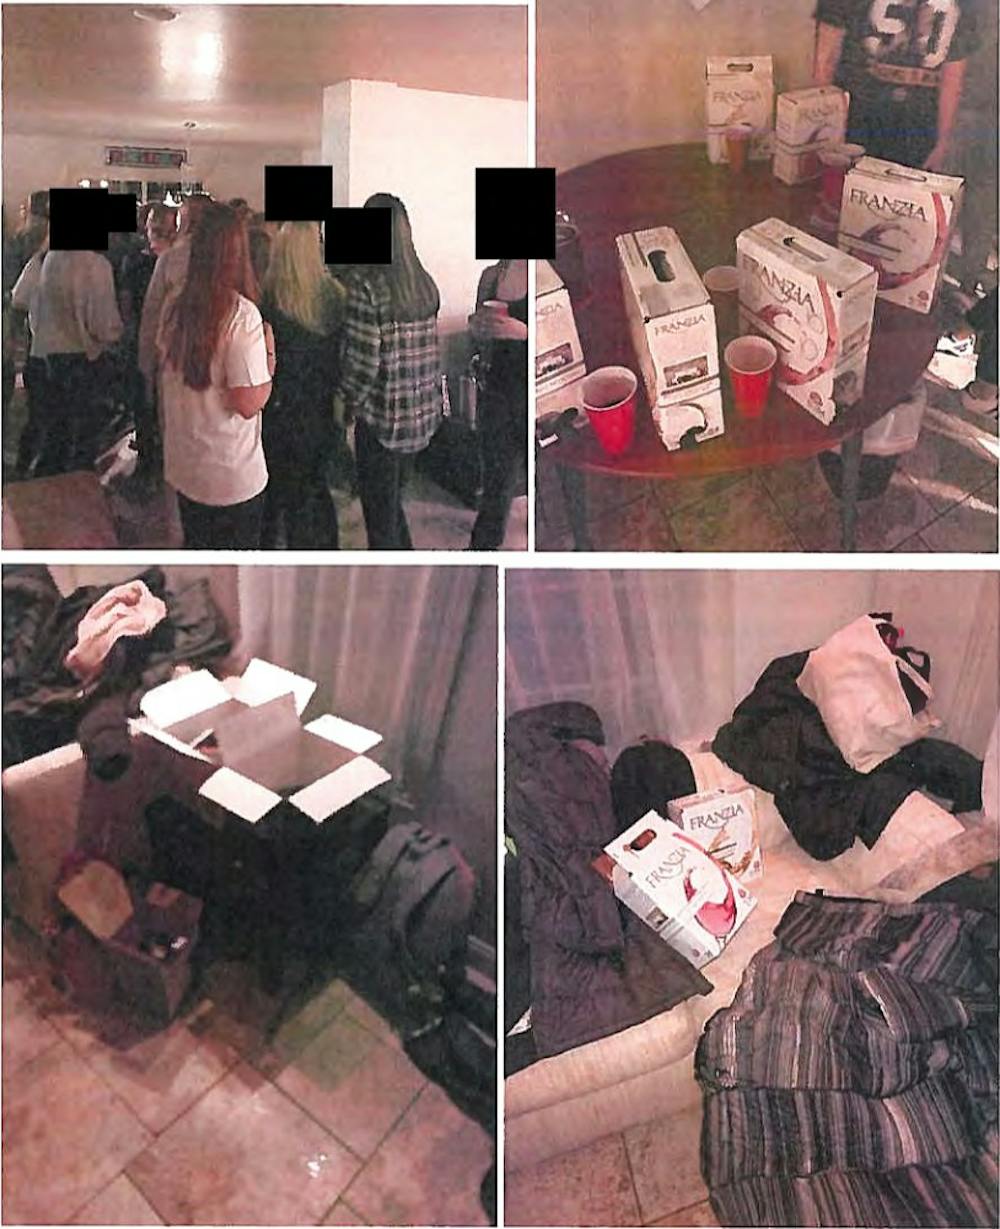 Photos attached to redacted report about the Feb. 10 Phi Mu report.